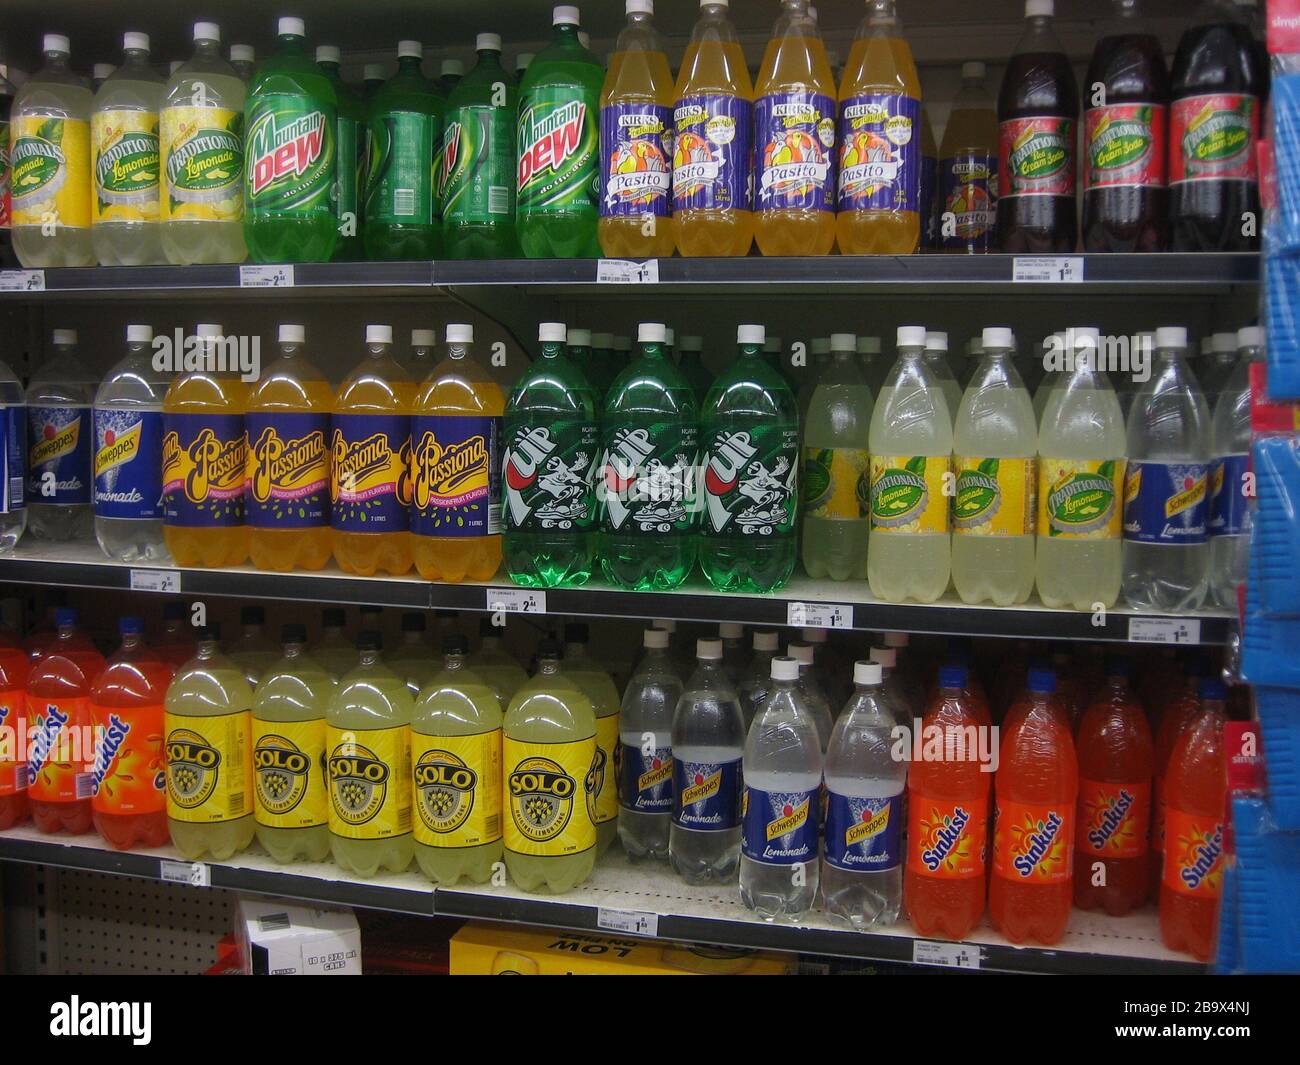 Soft drinks on shelves in a Woolworths supermarket (en:Australia). Taken by 6 October 2006 (original upload date); Transferred from en.wikipedia to Commons.; SMC at English Stock Photo - Alamy